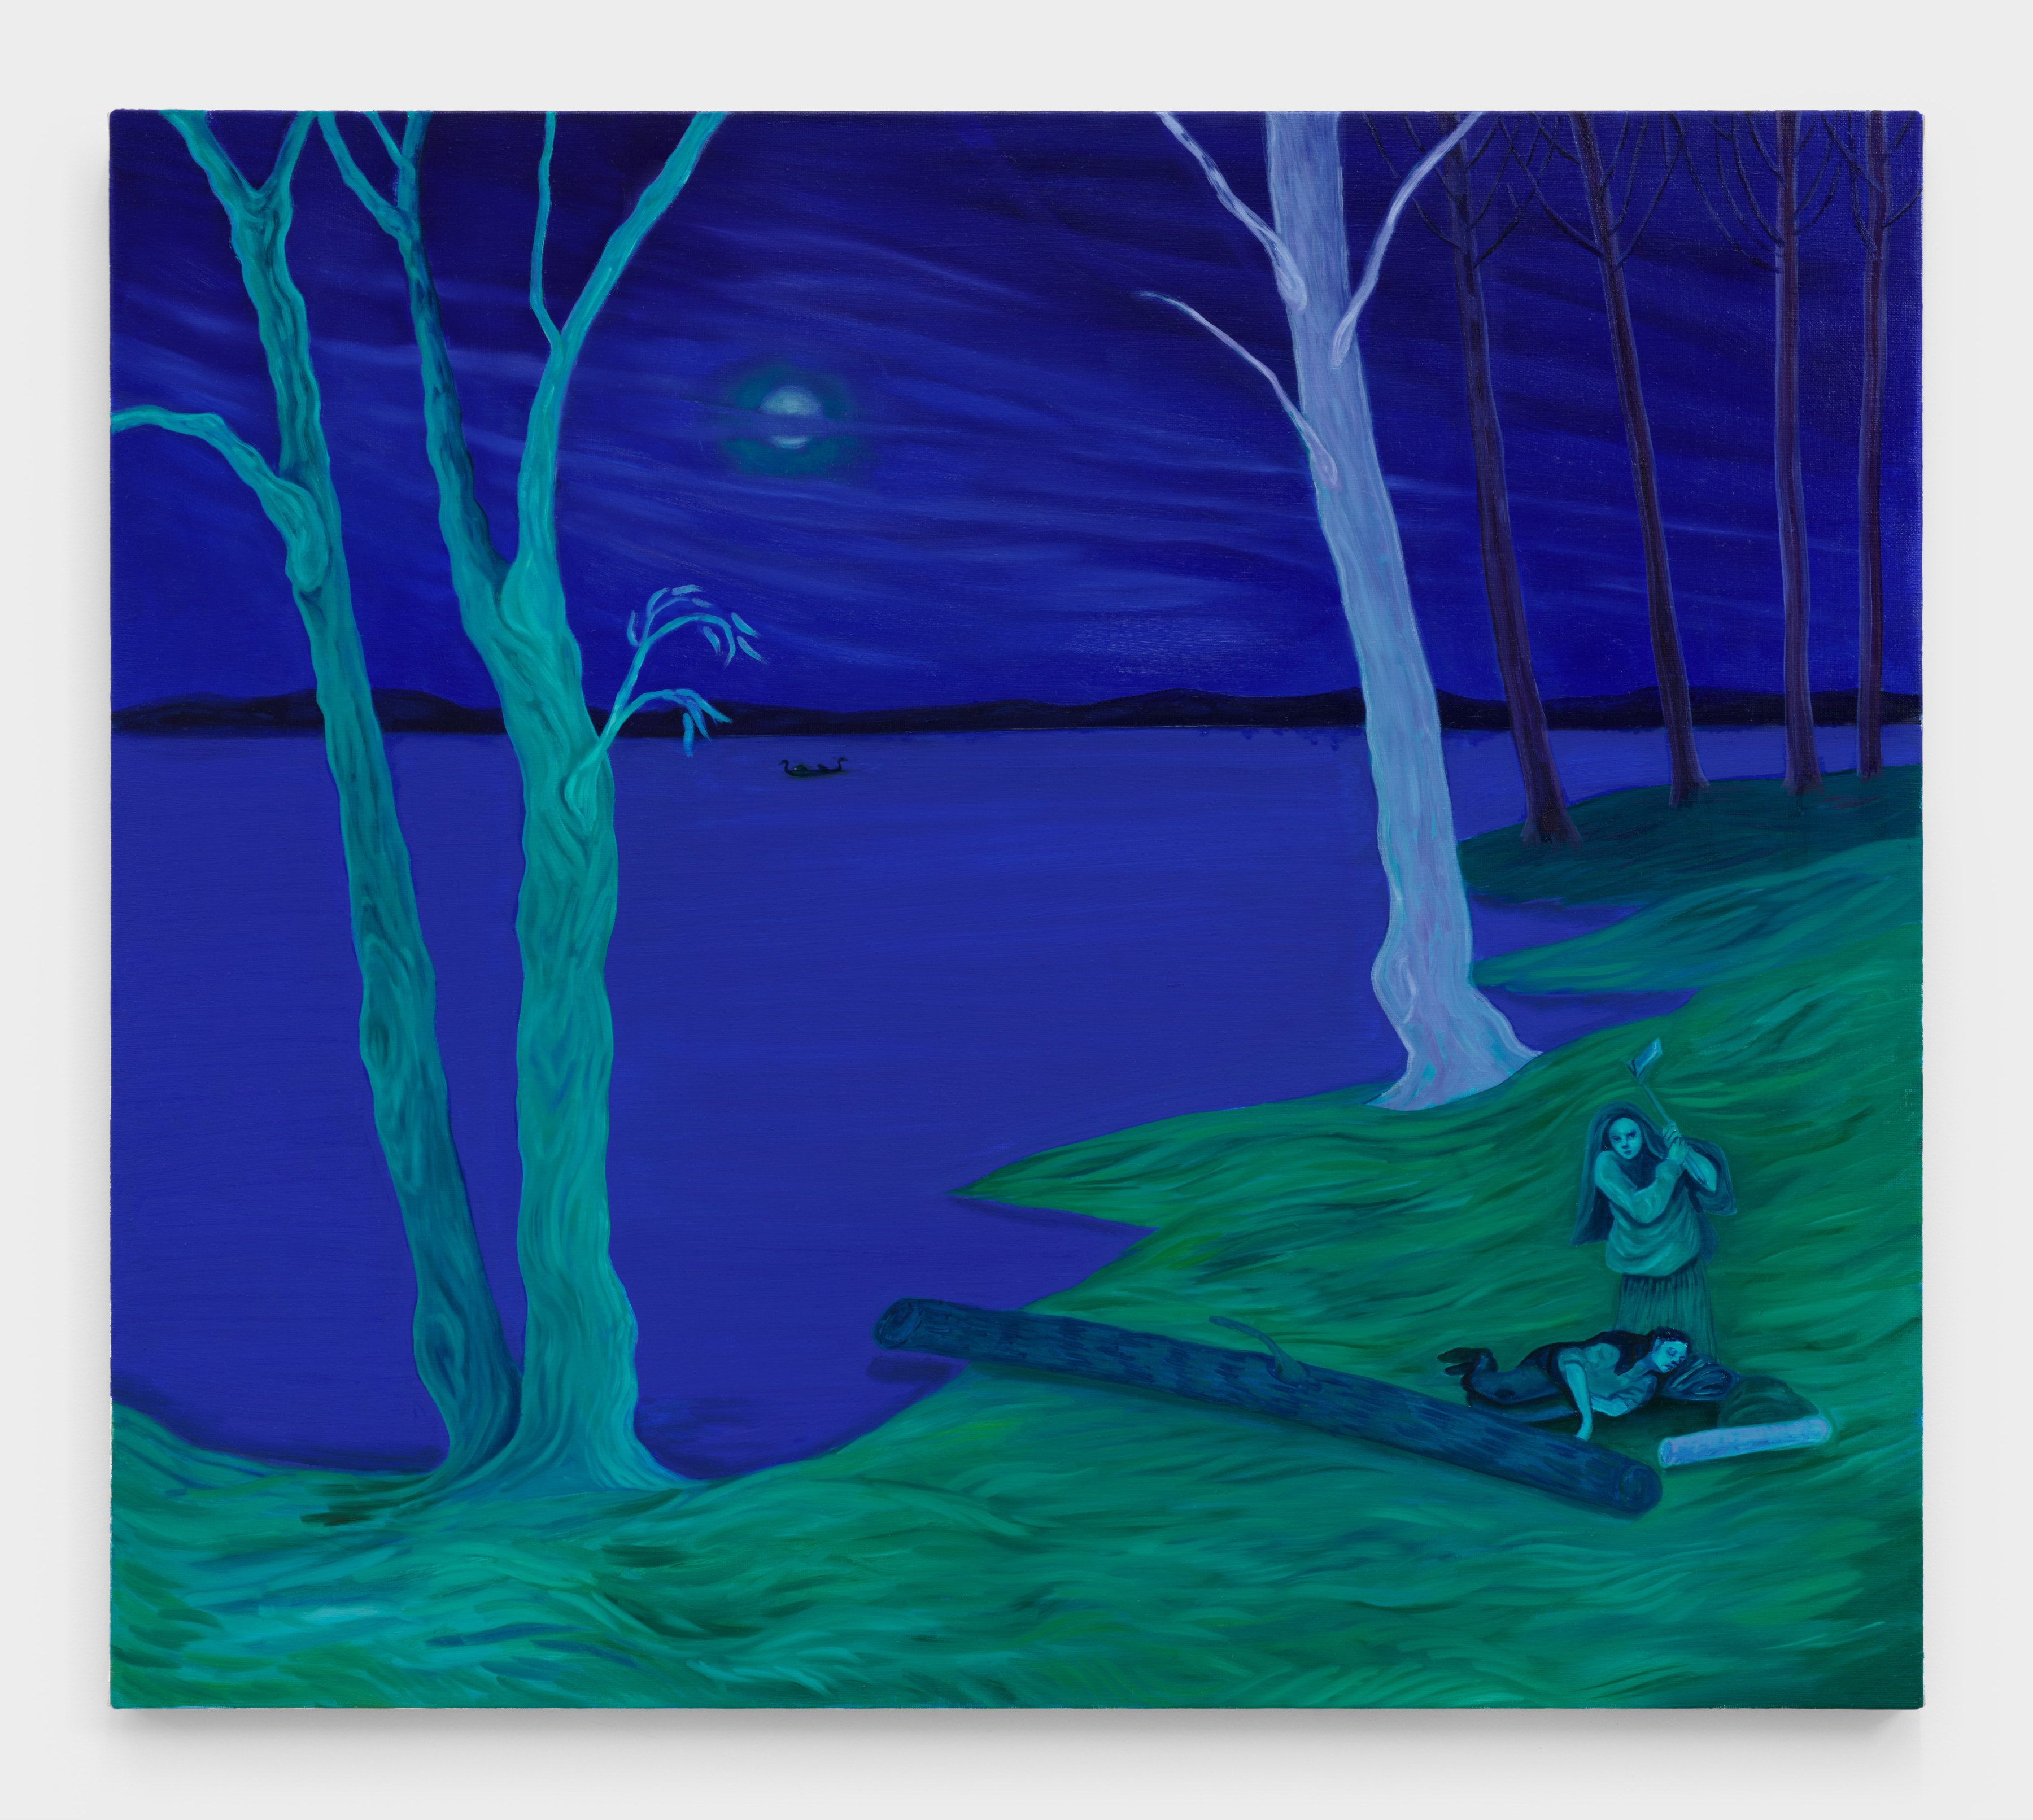 Bambou Gili's artwork "Goya's Ghost". A woman in the woods by a lake looks at the viewer as she prepares to swing an axe on a sleeping man. 30 x 34 in (76.2 x 86.4 cm), oil on linen, 2023